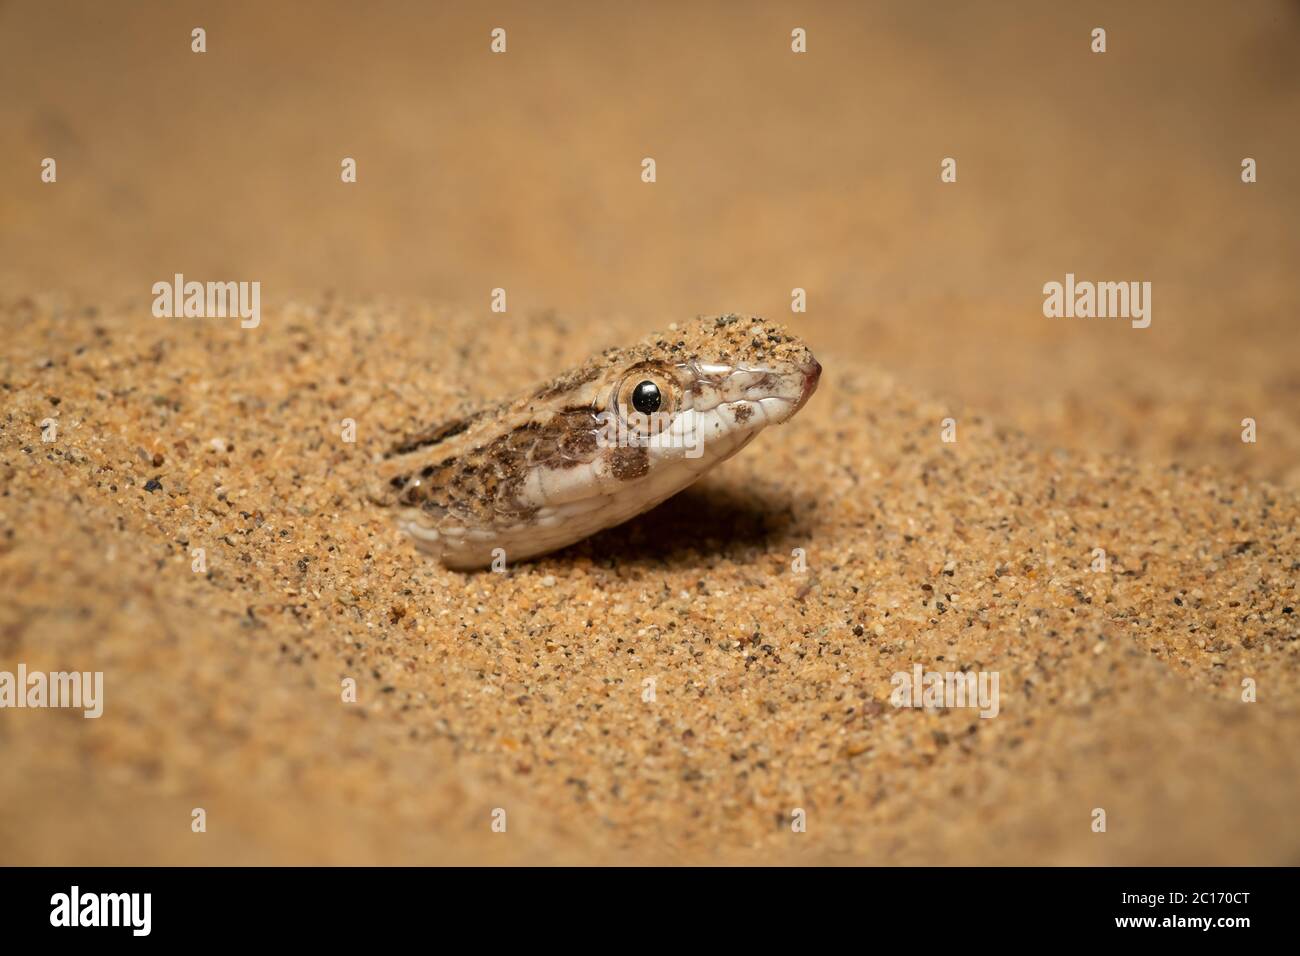 Awl Headed Snake emerging out of sand, Desert National Park, Rajasthan, India Stock Photo